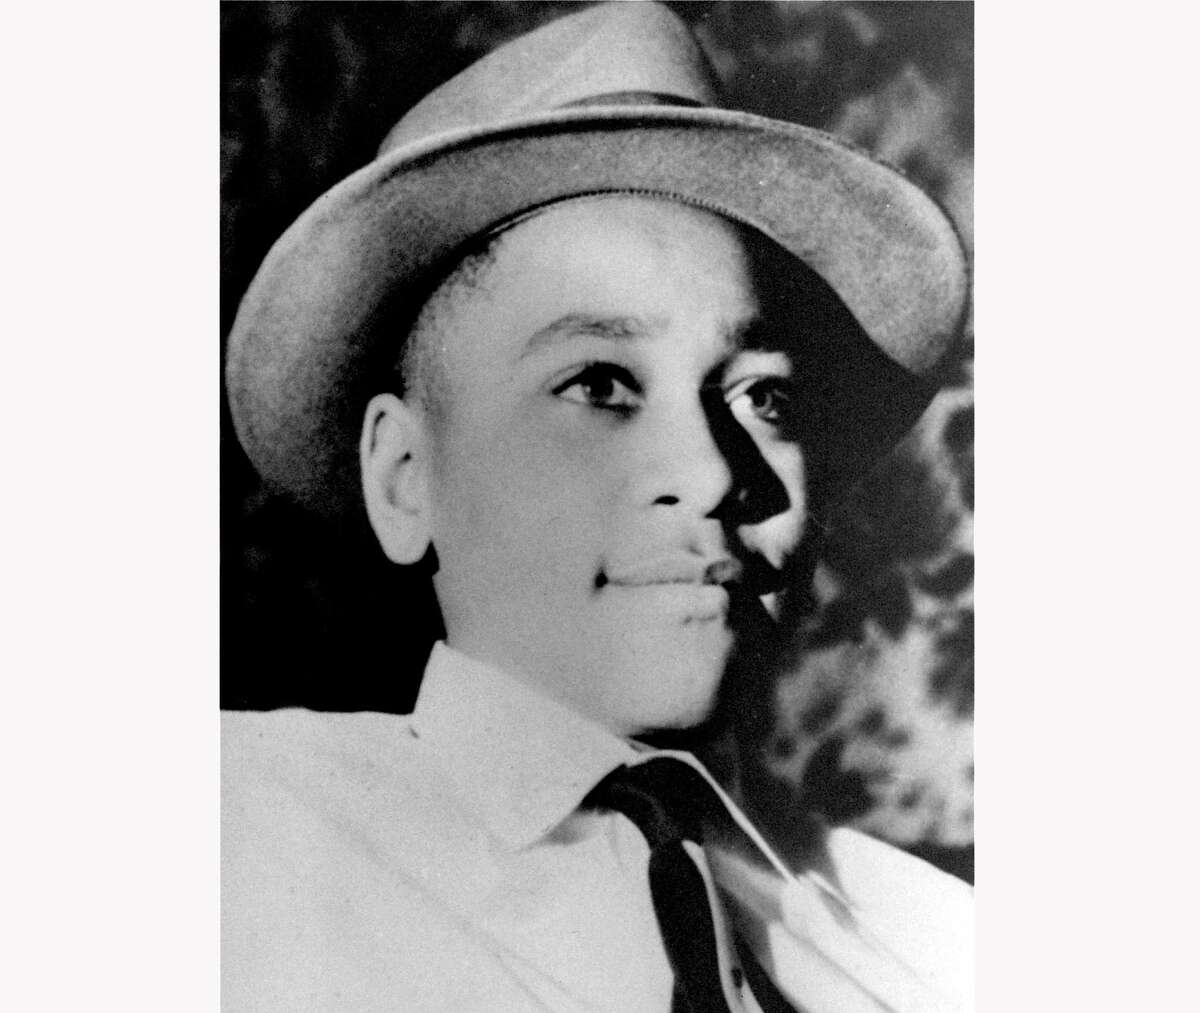 This undated file photo shows Emmett Louis Till, a 14-year-old black Chicago boy, who was kidnapped, tortured and murdered in 1955 after he allegedly whistled at a white woman in Mississippi. The teenager’s brutal killing in Mississippi helped inspire the civil rights movement more than 60 years ago.